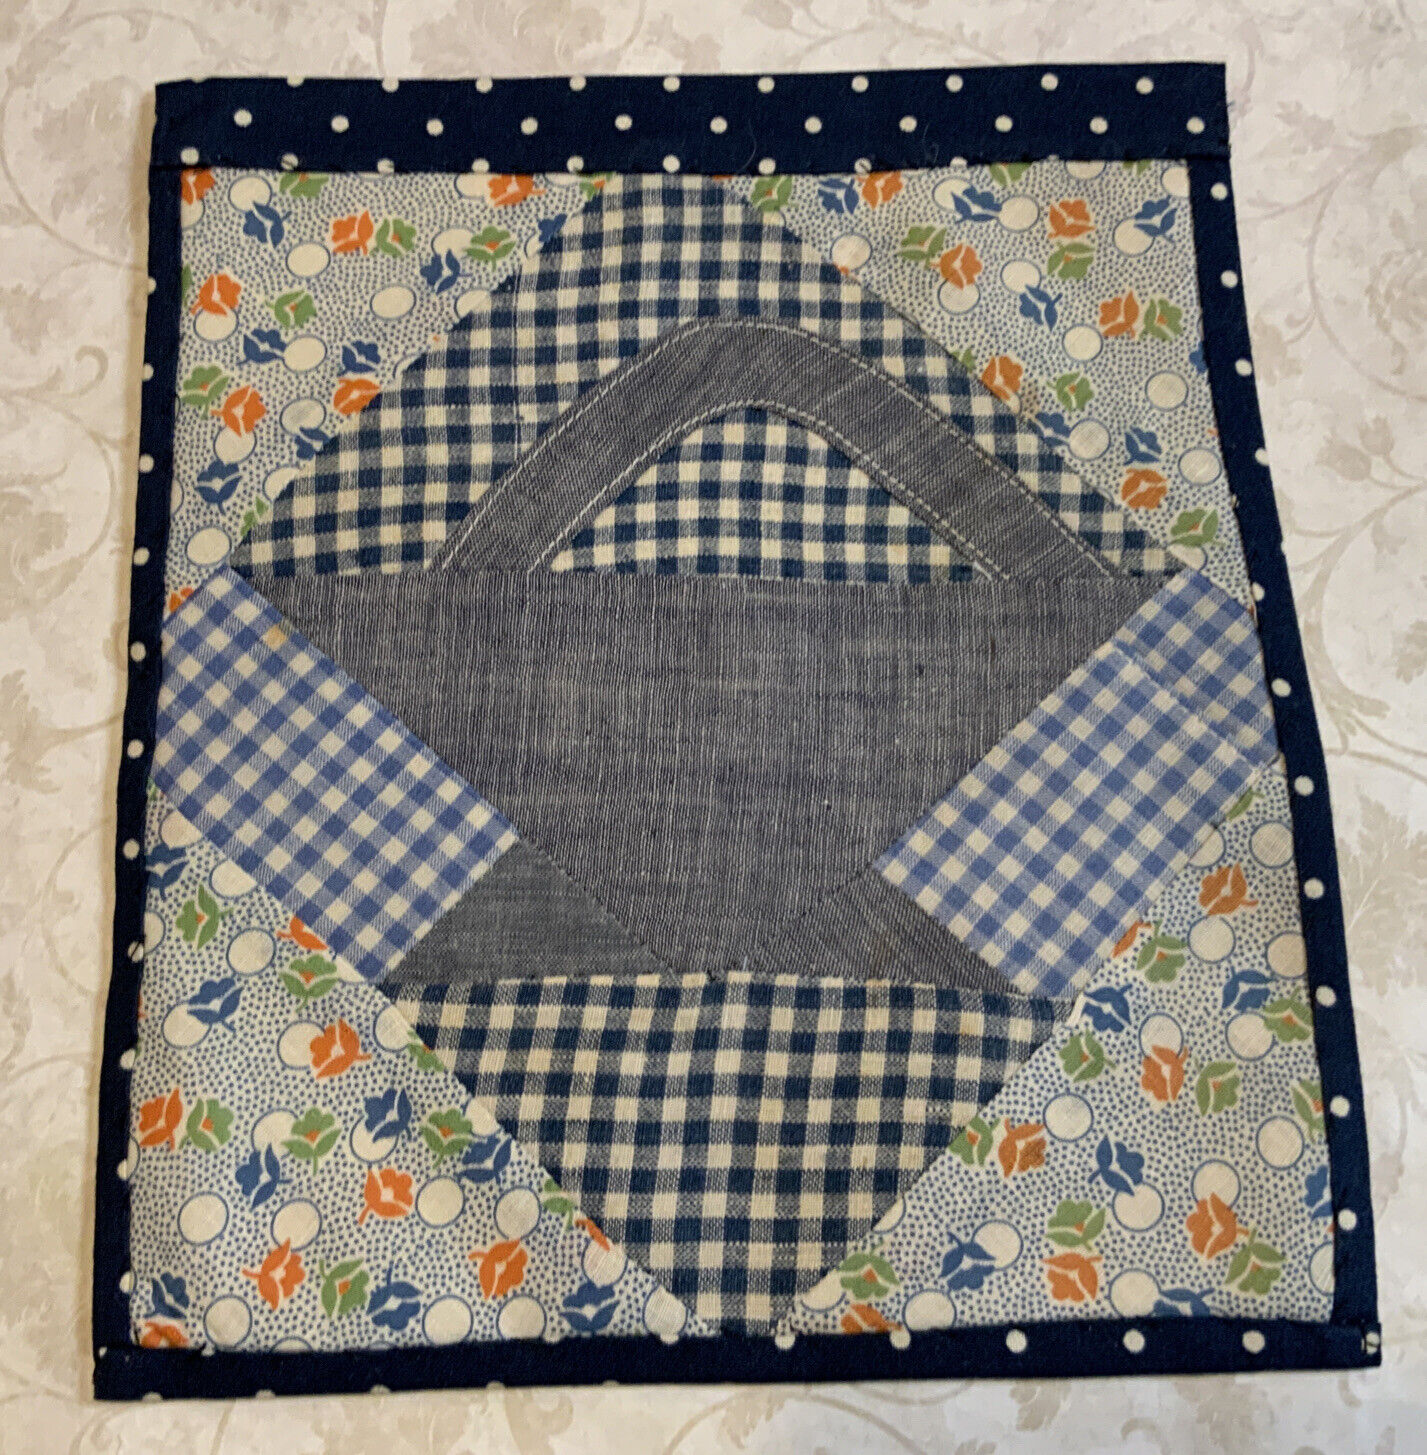 Vintage Patchwork Quilt Wall Hanging Or Table Topper, Basket, Blue & White